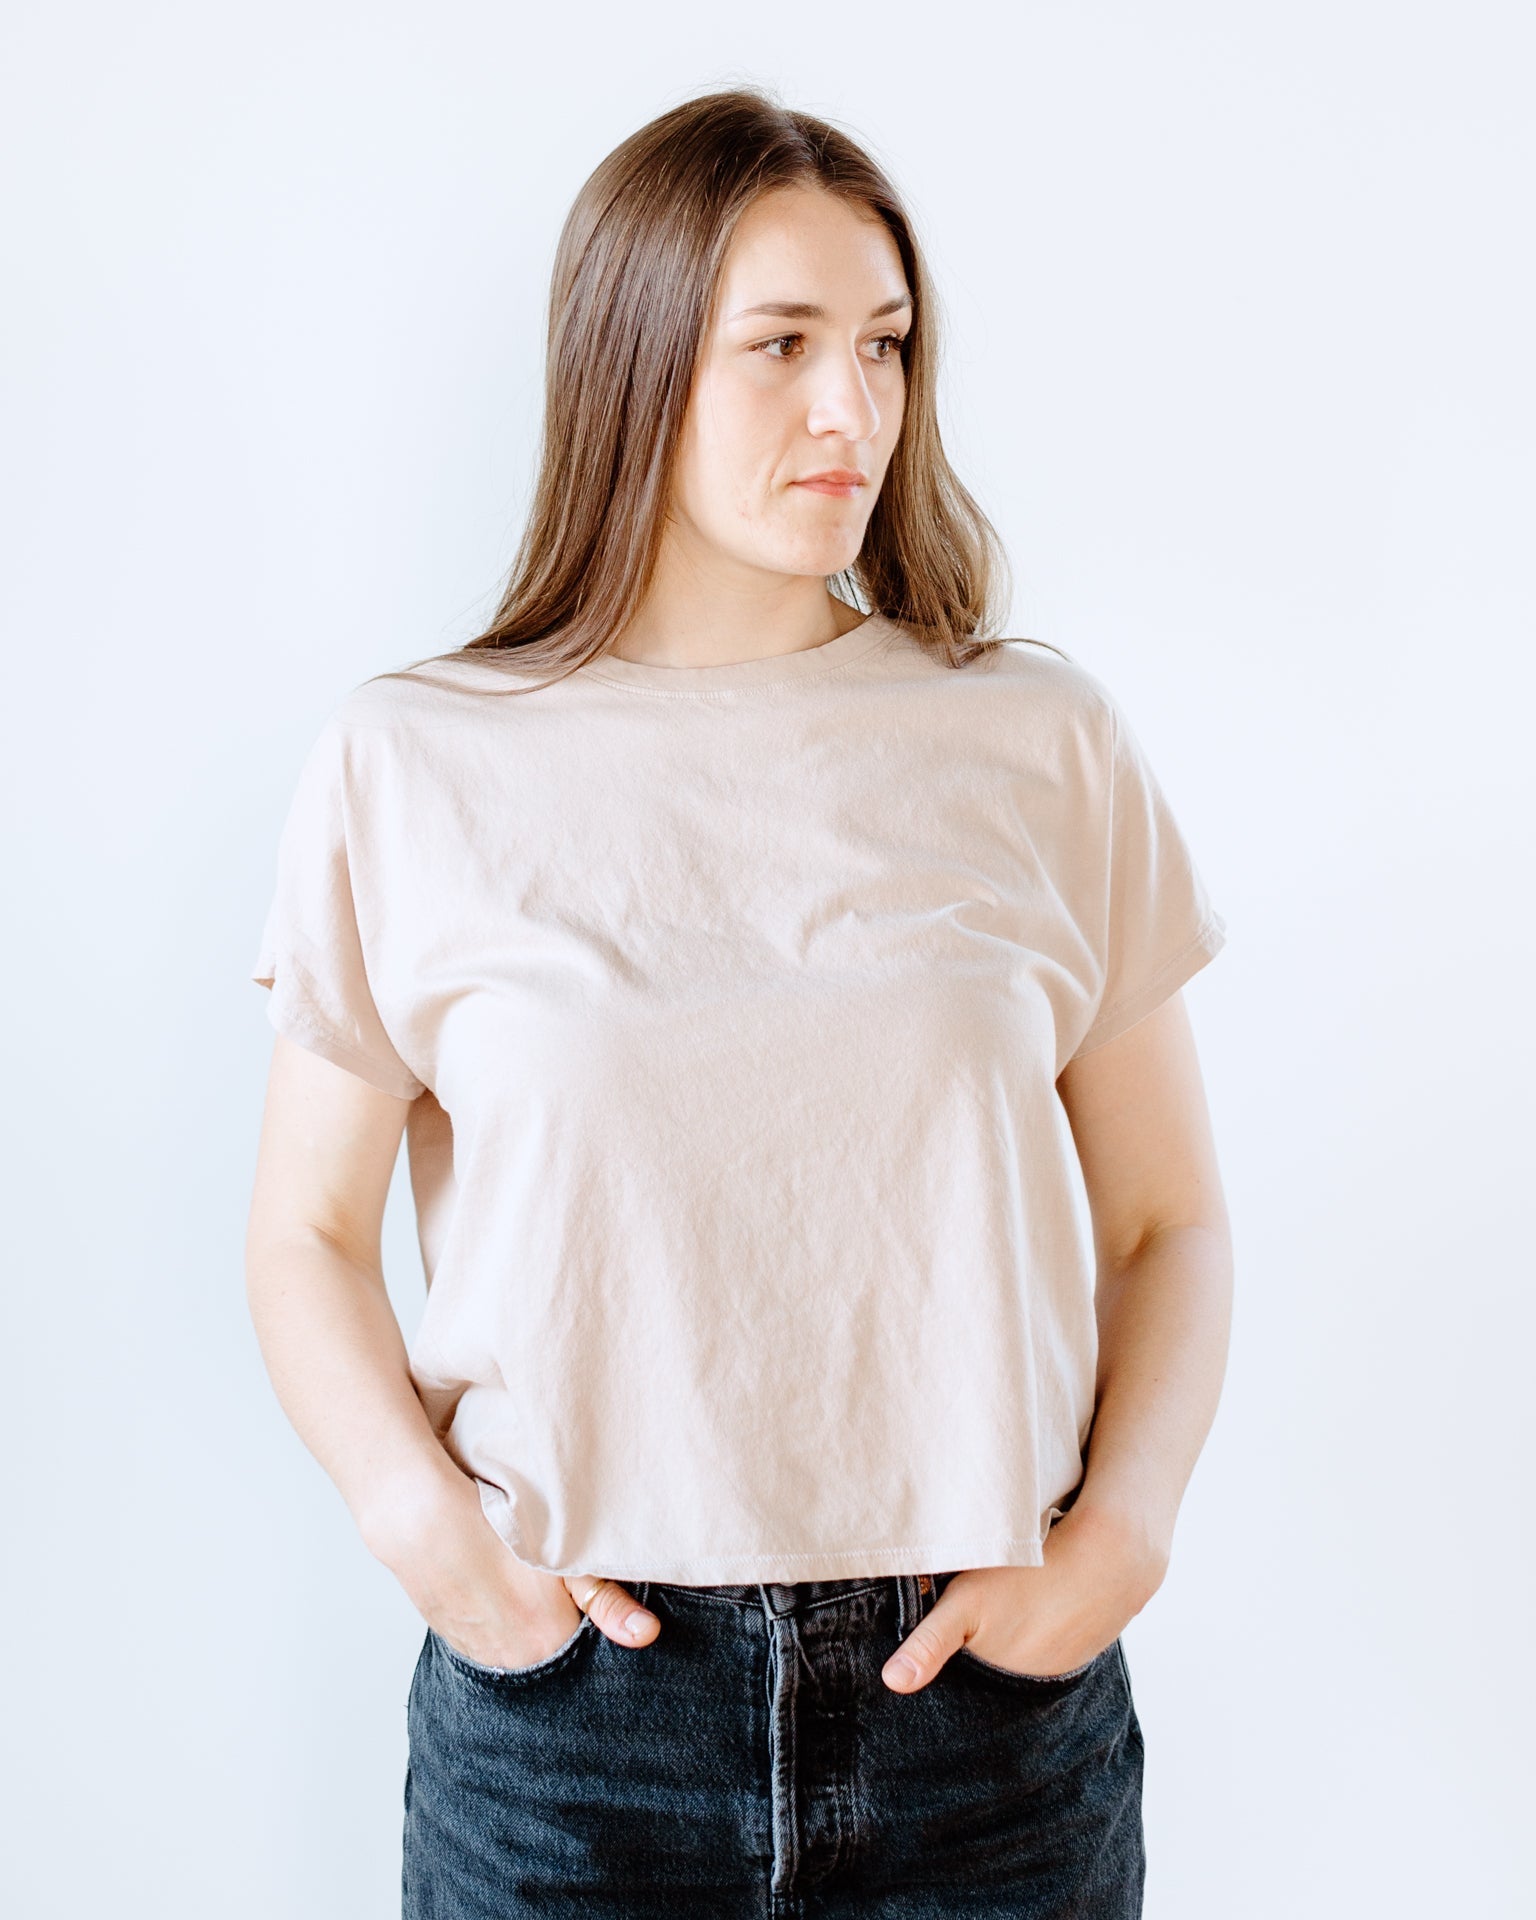 It is well LA Organic Cotton Boxy Tee in Soft Beige- Bliss Boutiques